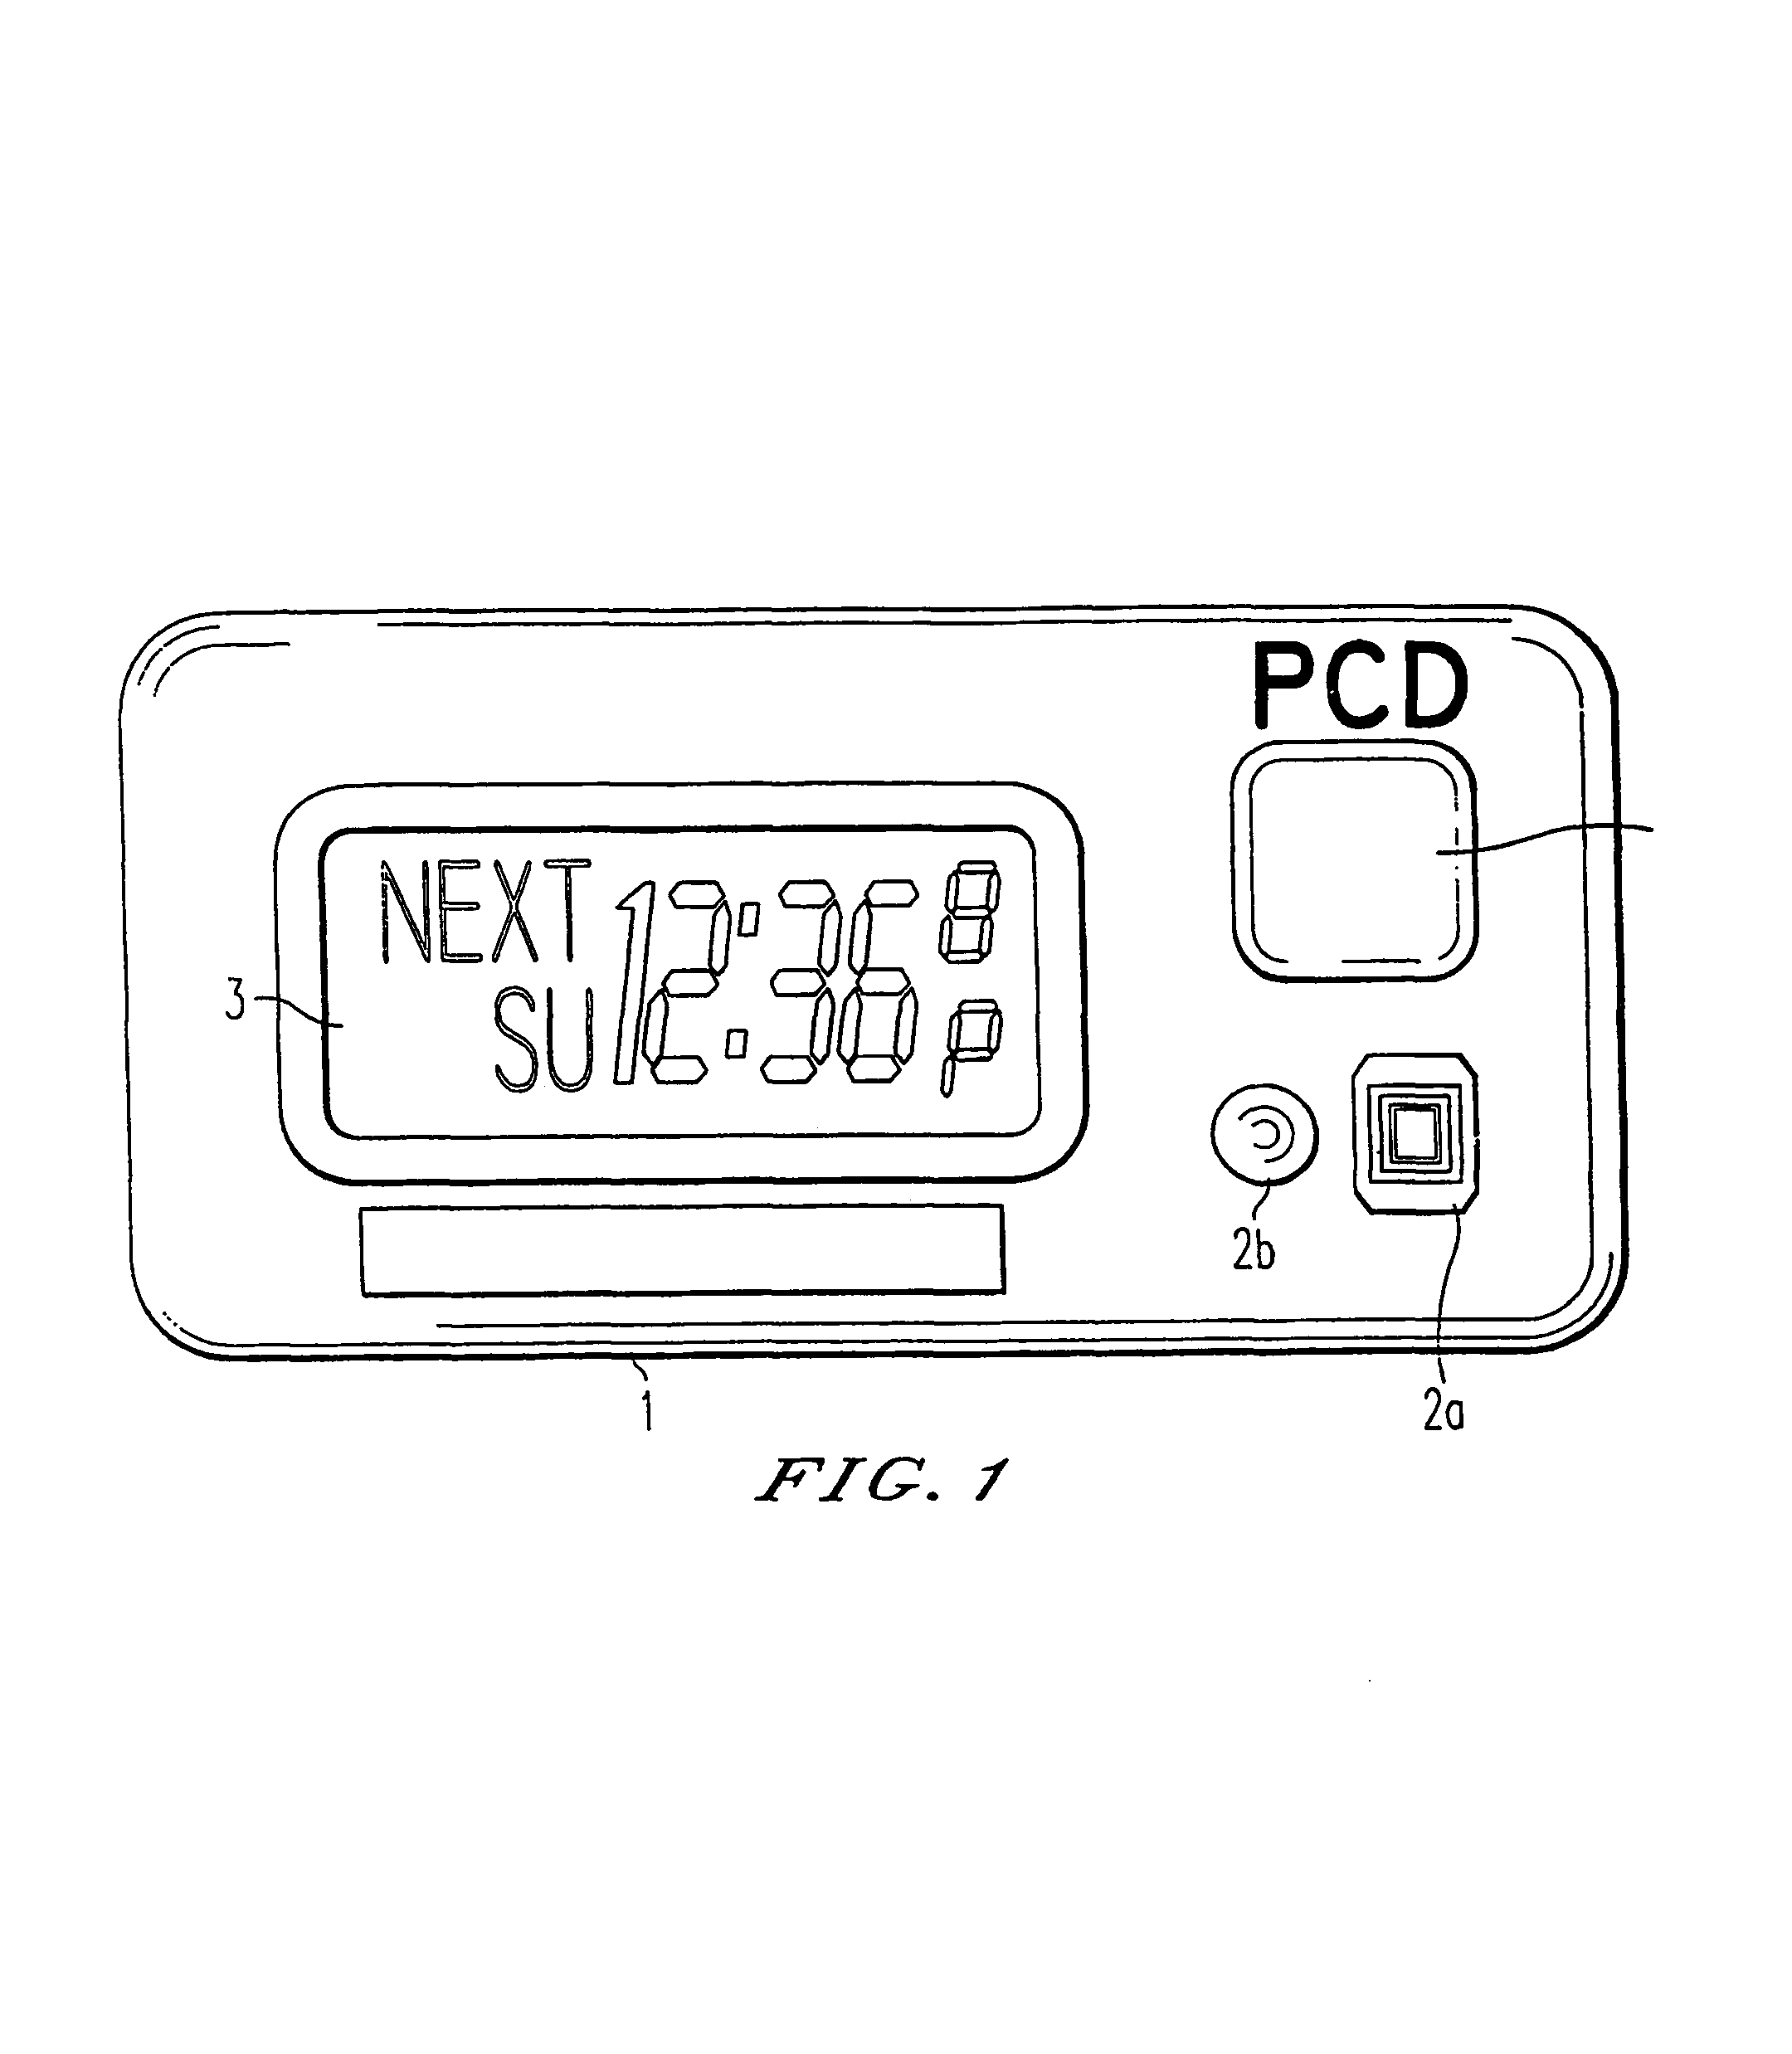 Prescription compliance device and method of using device